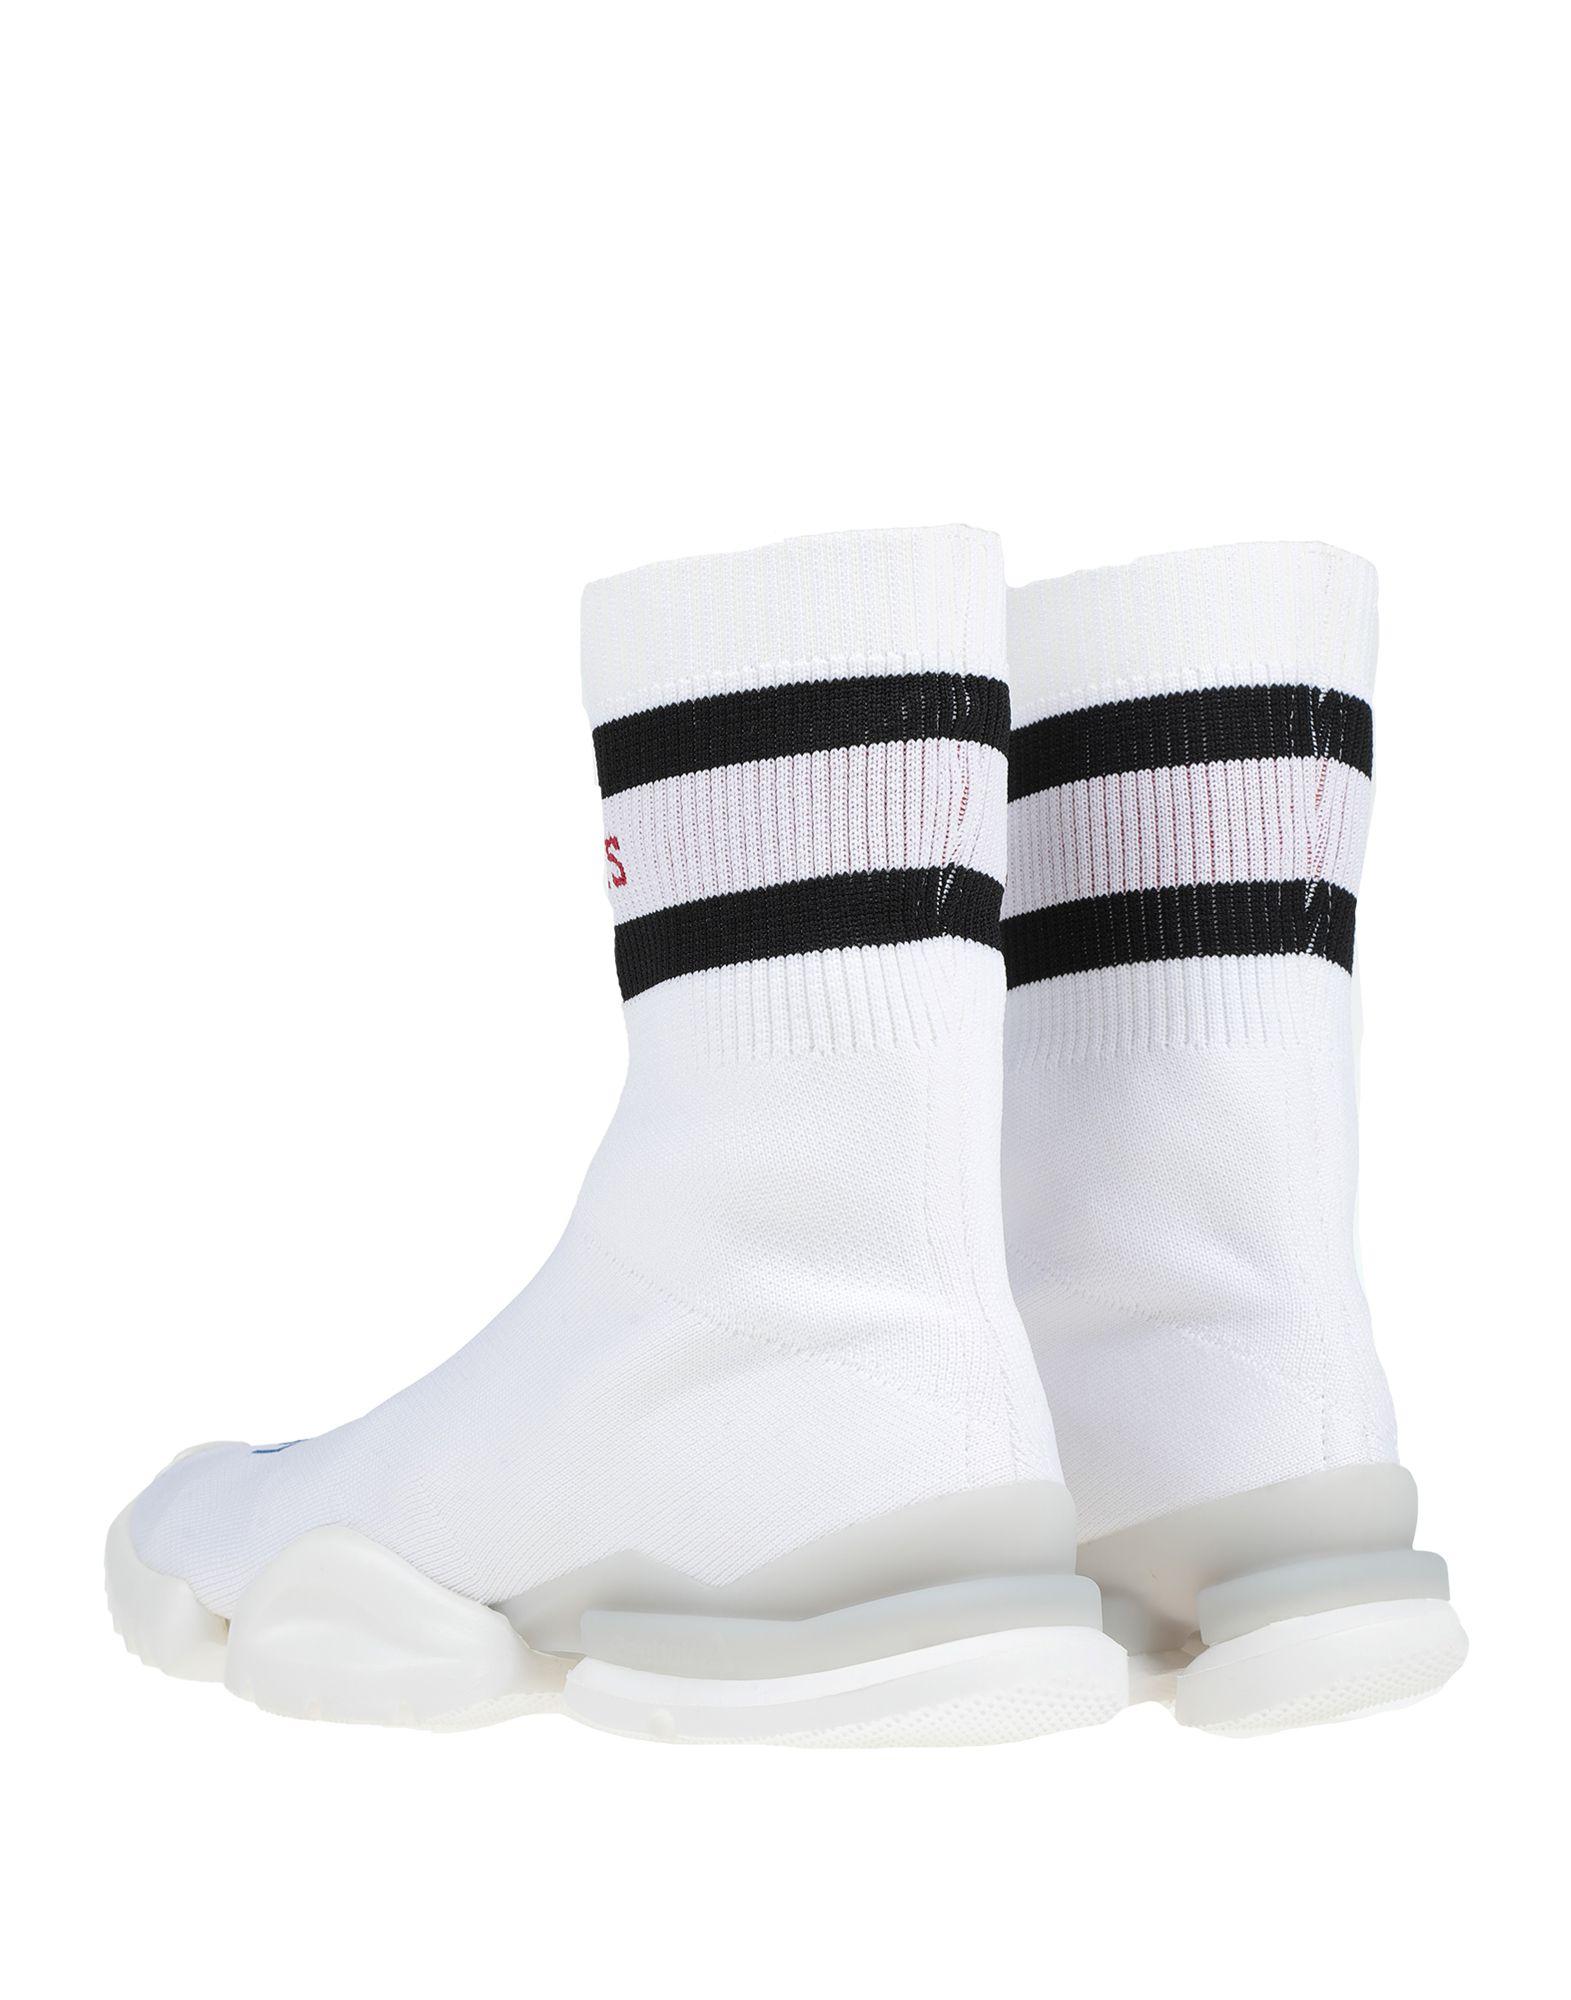 Vetements X Reebok High-top Sock Trainers in White for Men - Lyst